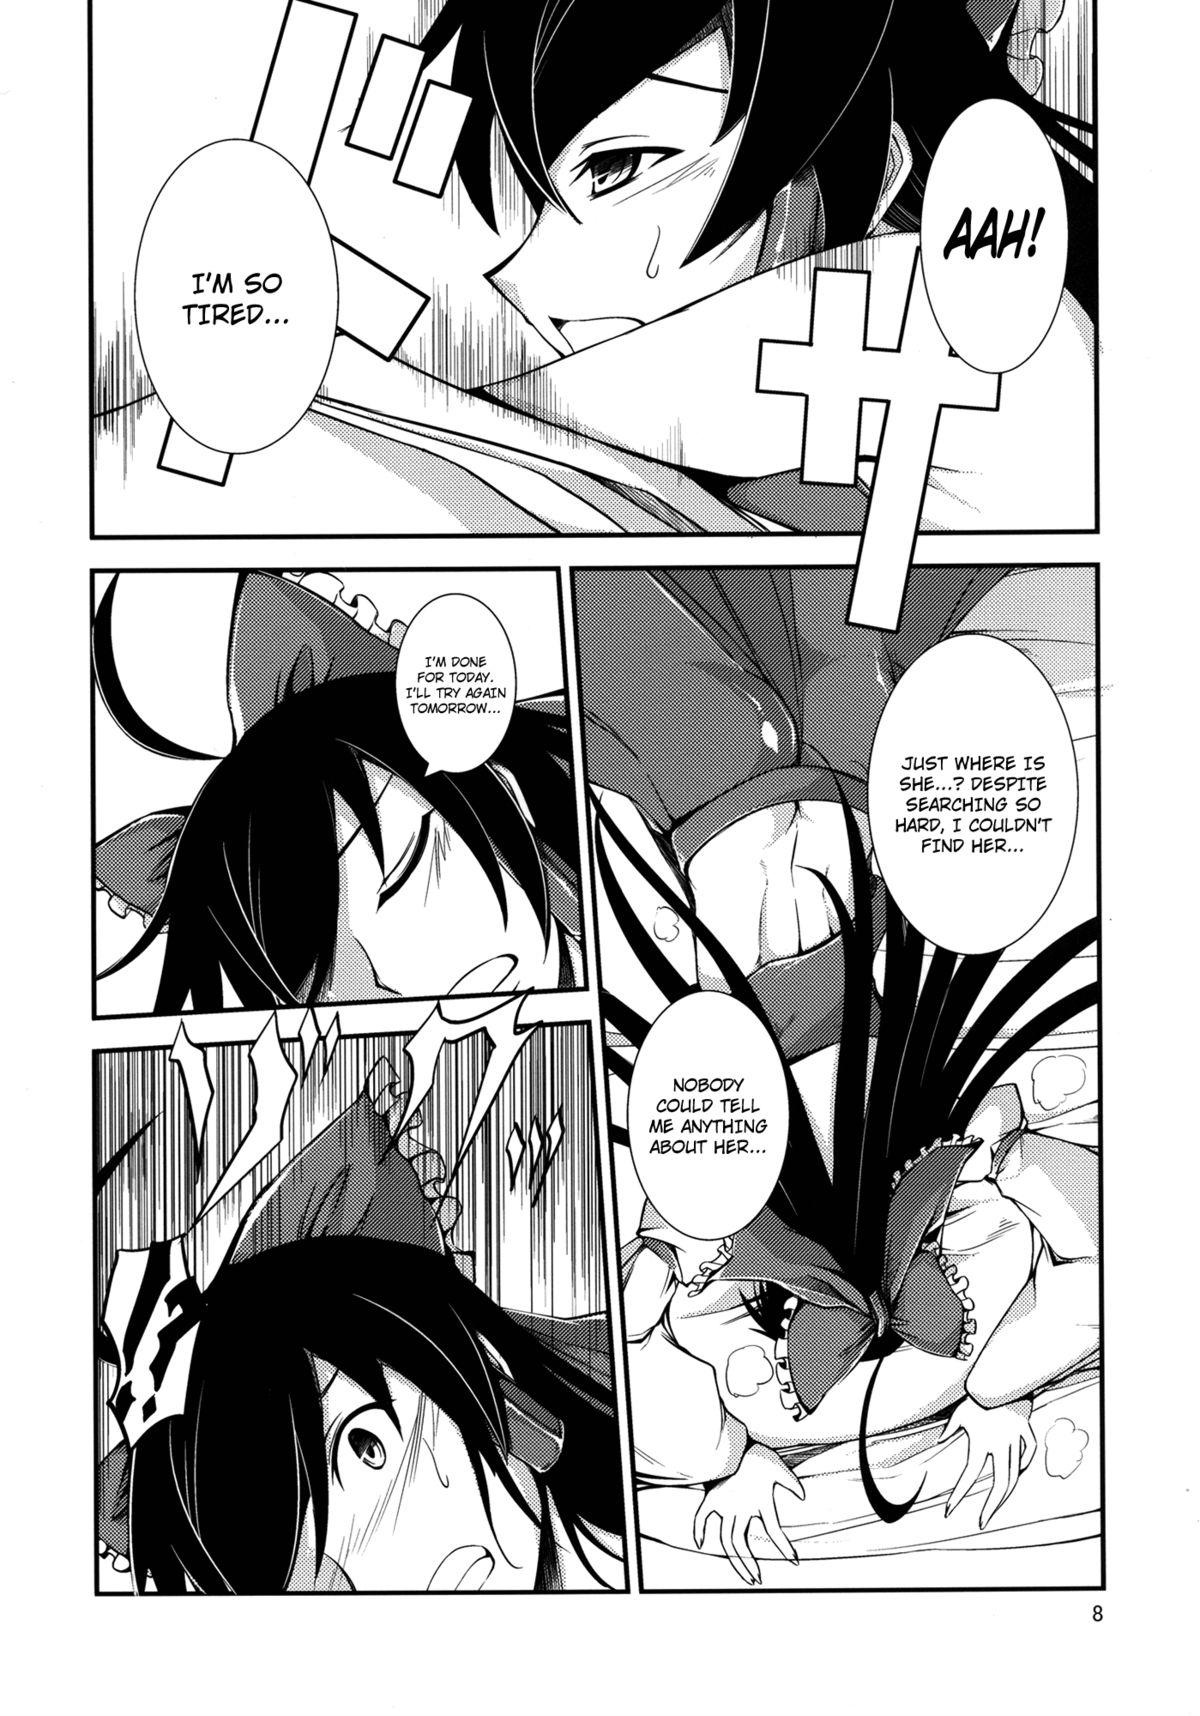 Dominant (Reitaisai 10) [JUNK × JUNK (kojou)] Kuro Miko no Hen ~Sono Ni~ | The Incident of the Black Shrine Maiden ~Part 2~ (Touhou Project) [English] {Afro} - Touhou project Hot Wife - Page 8